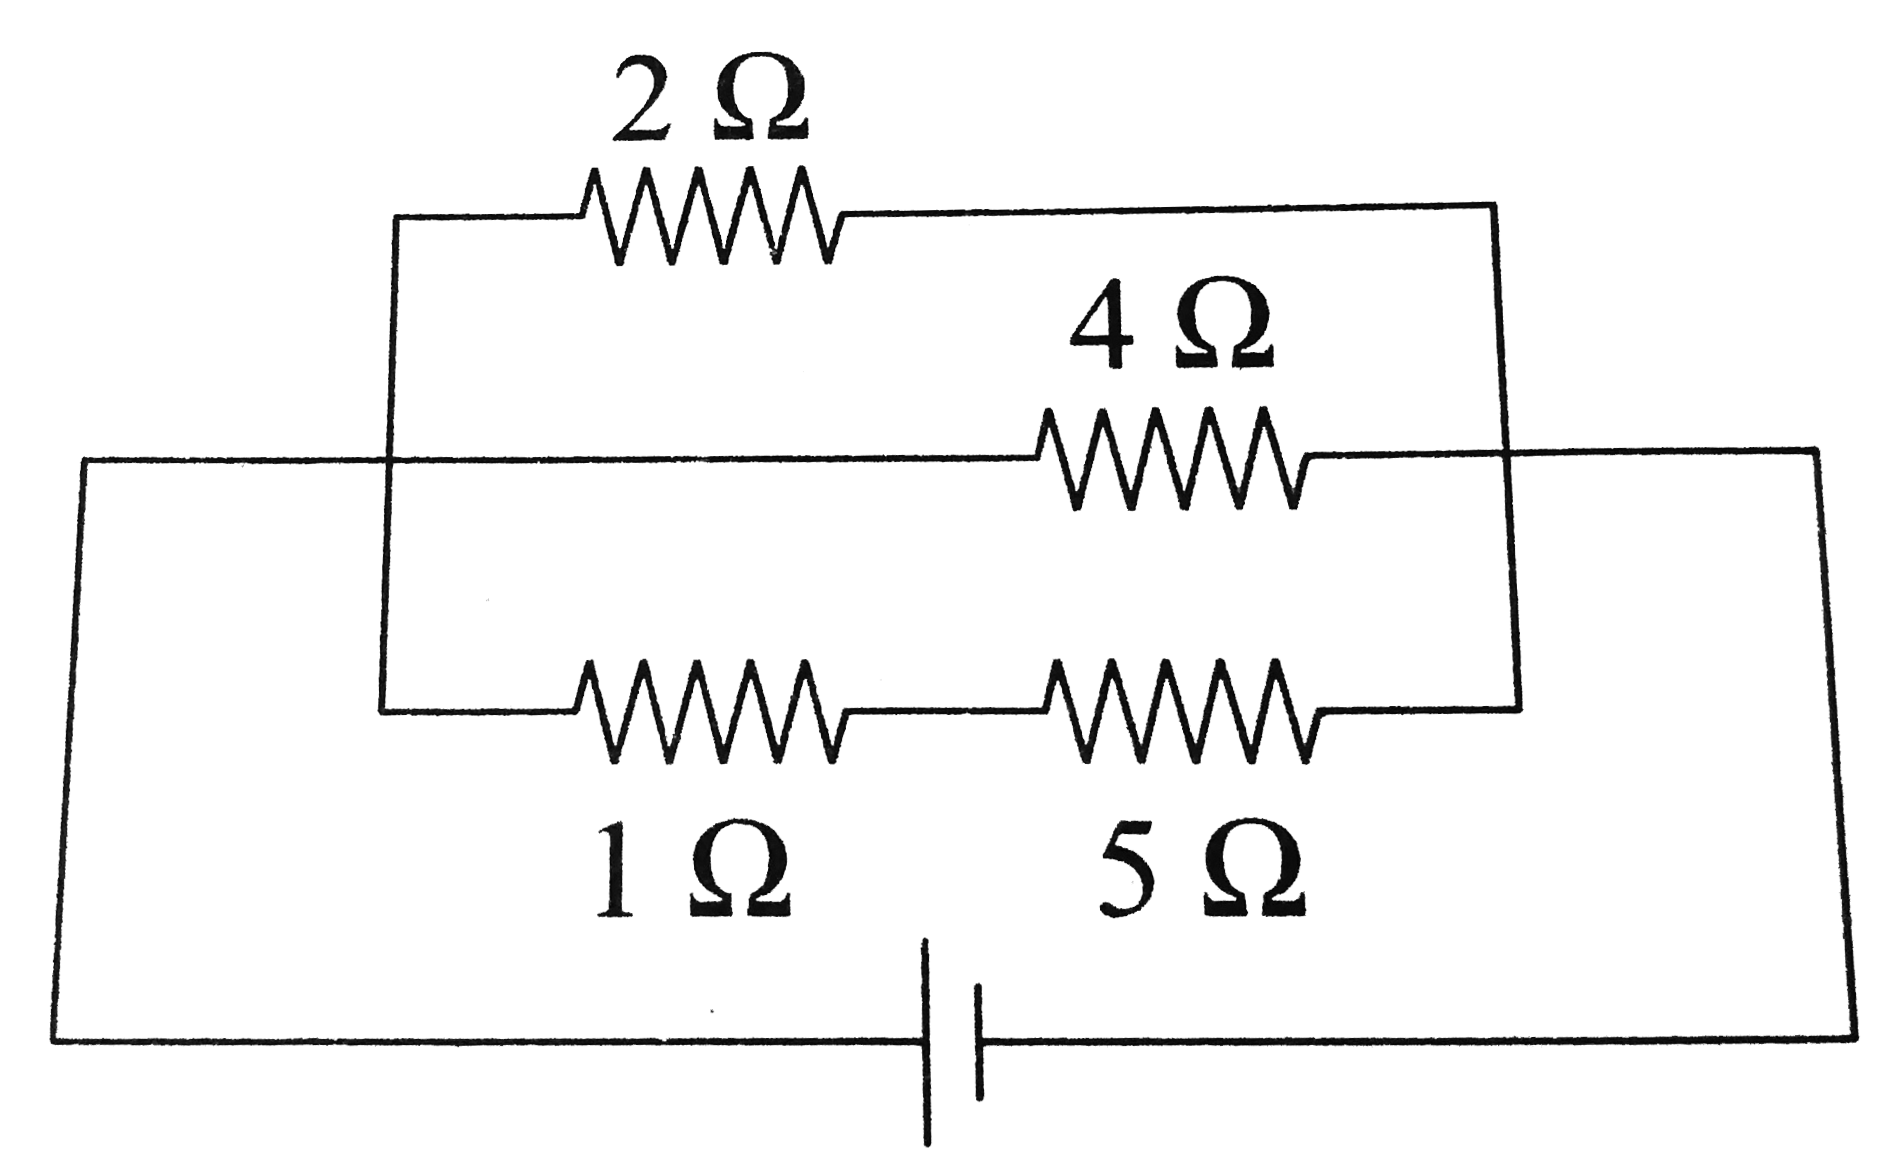 A current of 3 A flows through the 2 Omega resistor as shown in the circuit. The power dissipated in the 5 Omega resistor is